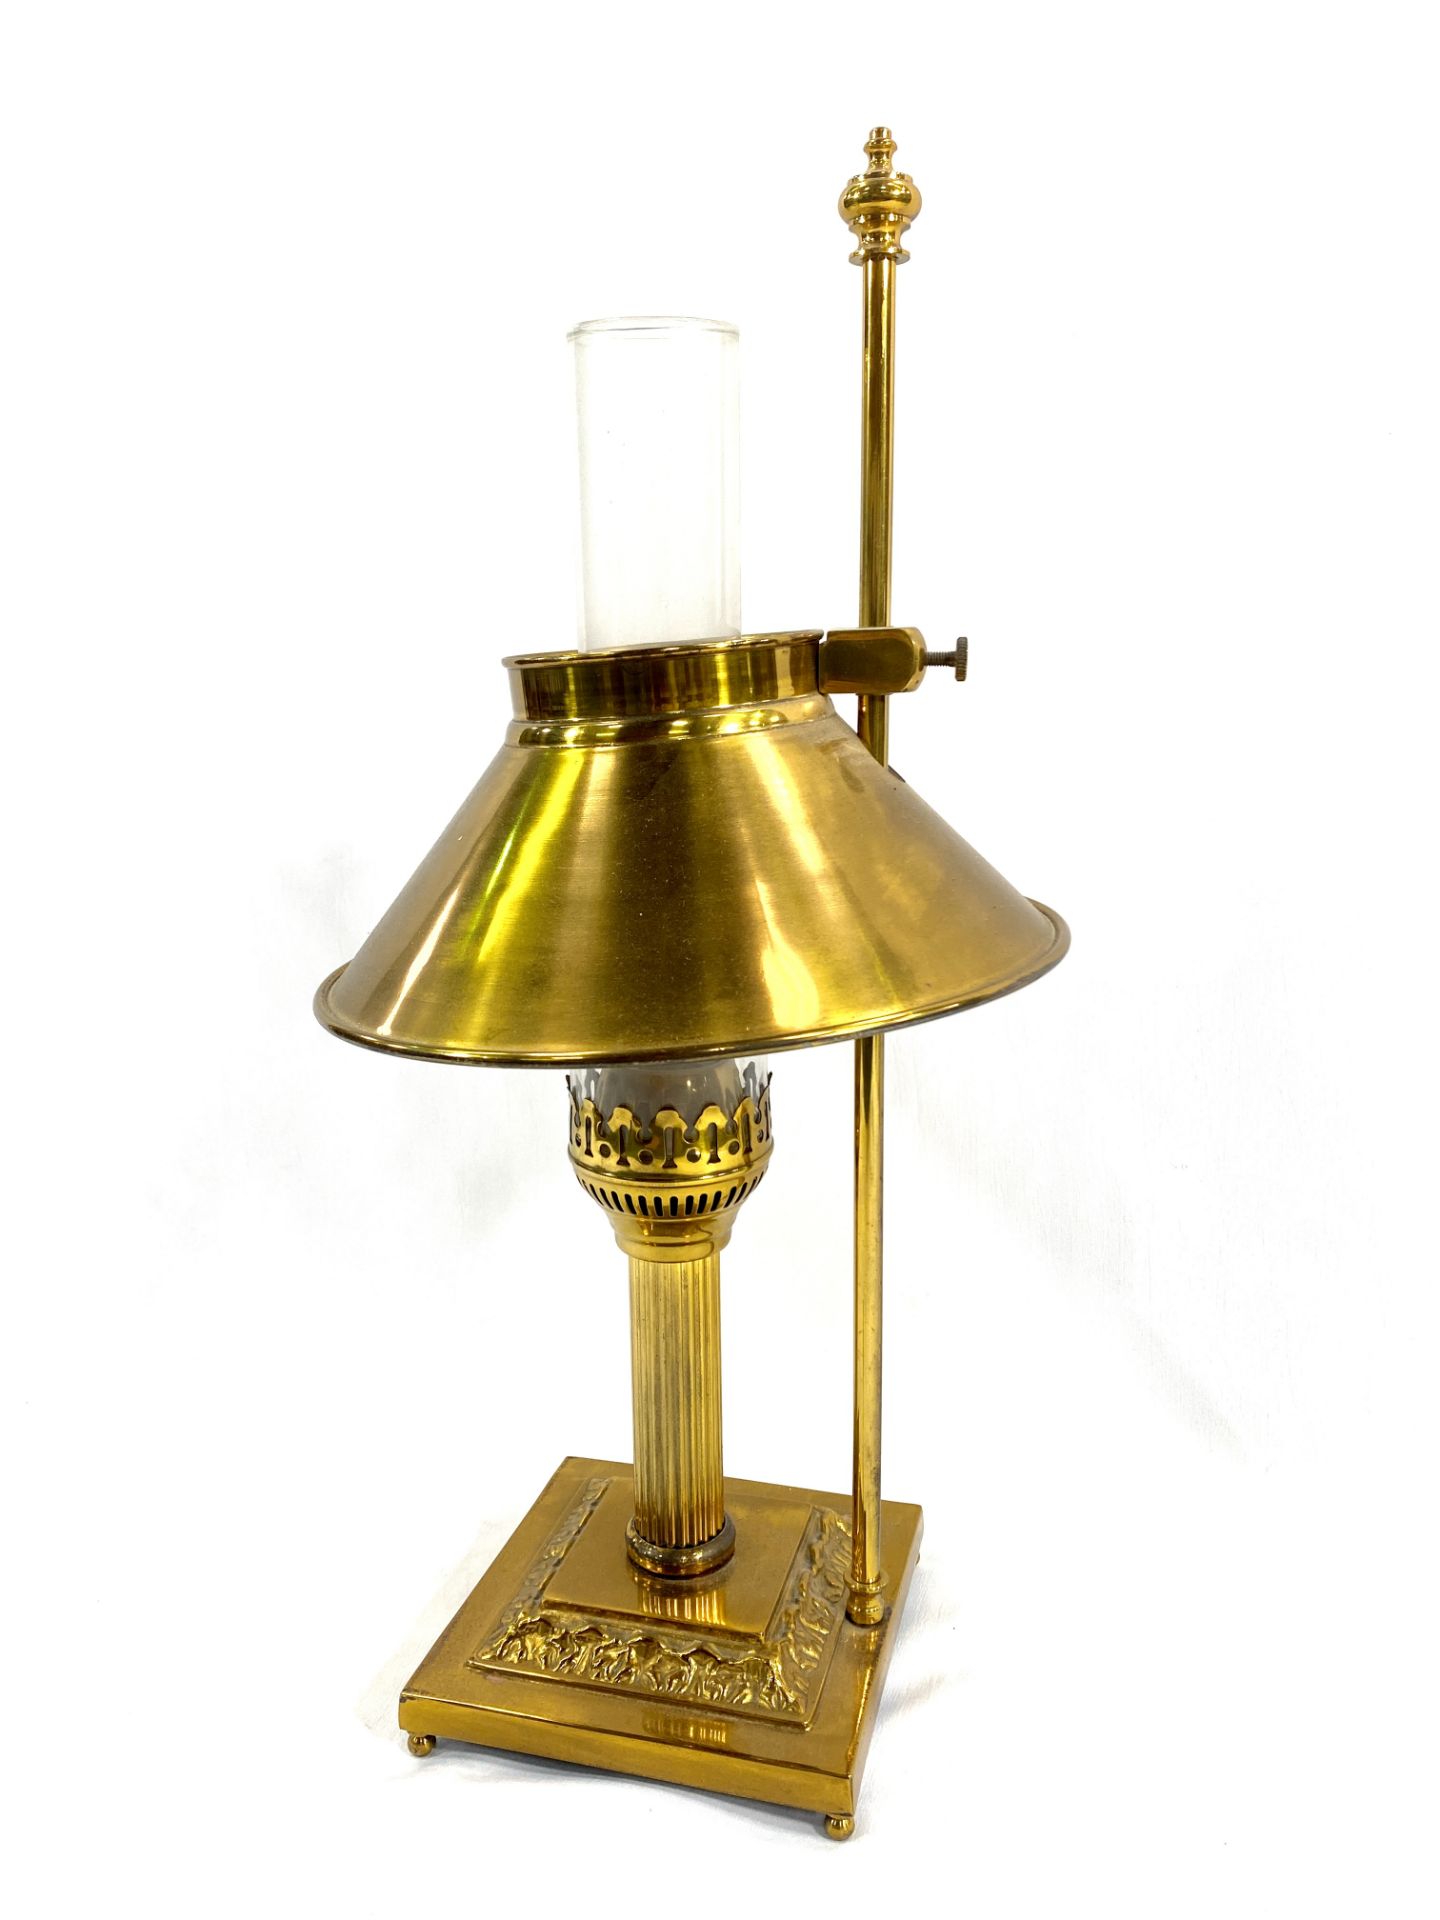 Brass table lamp in the style of a gas lamp